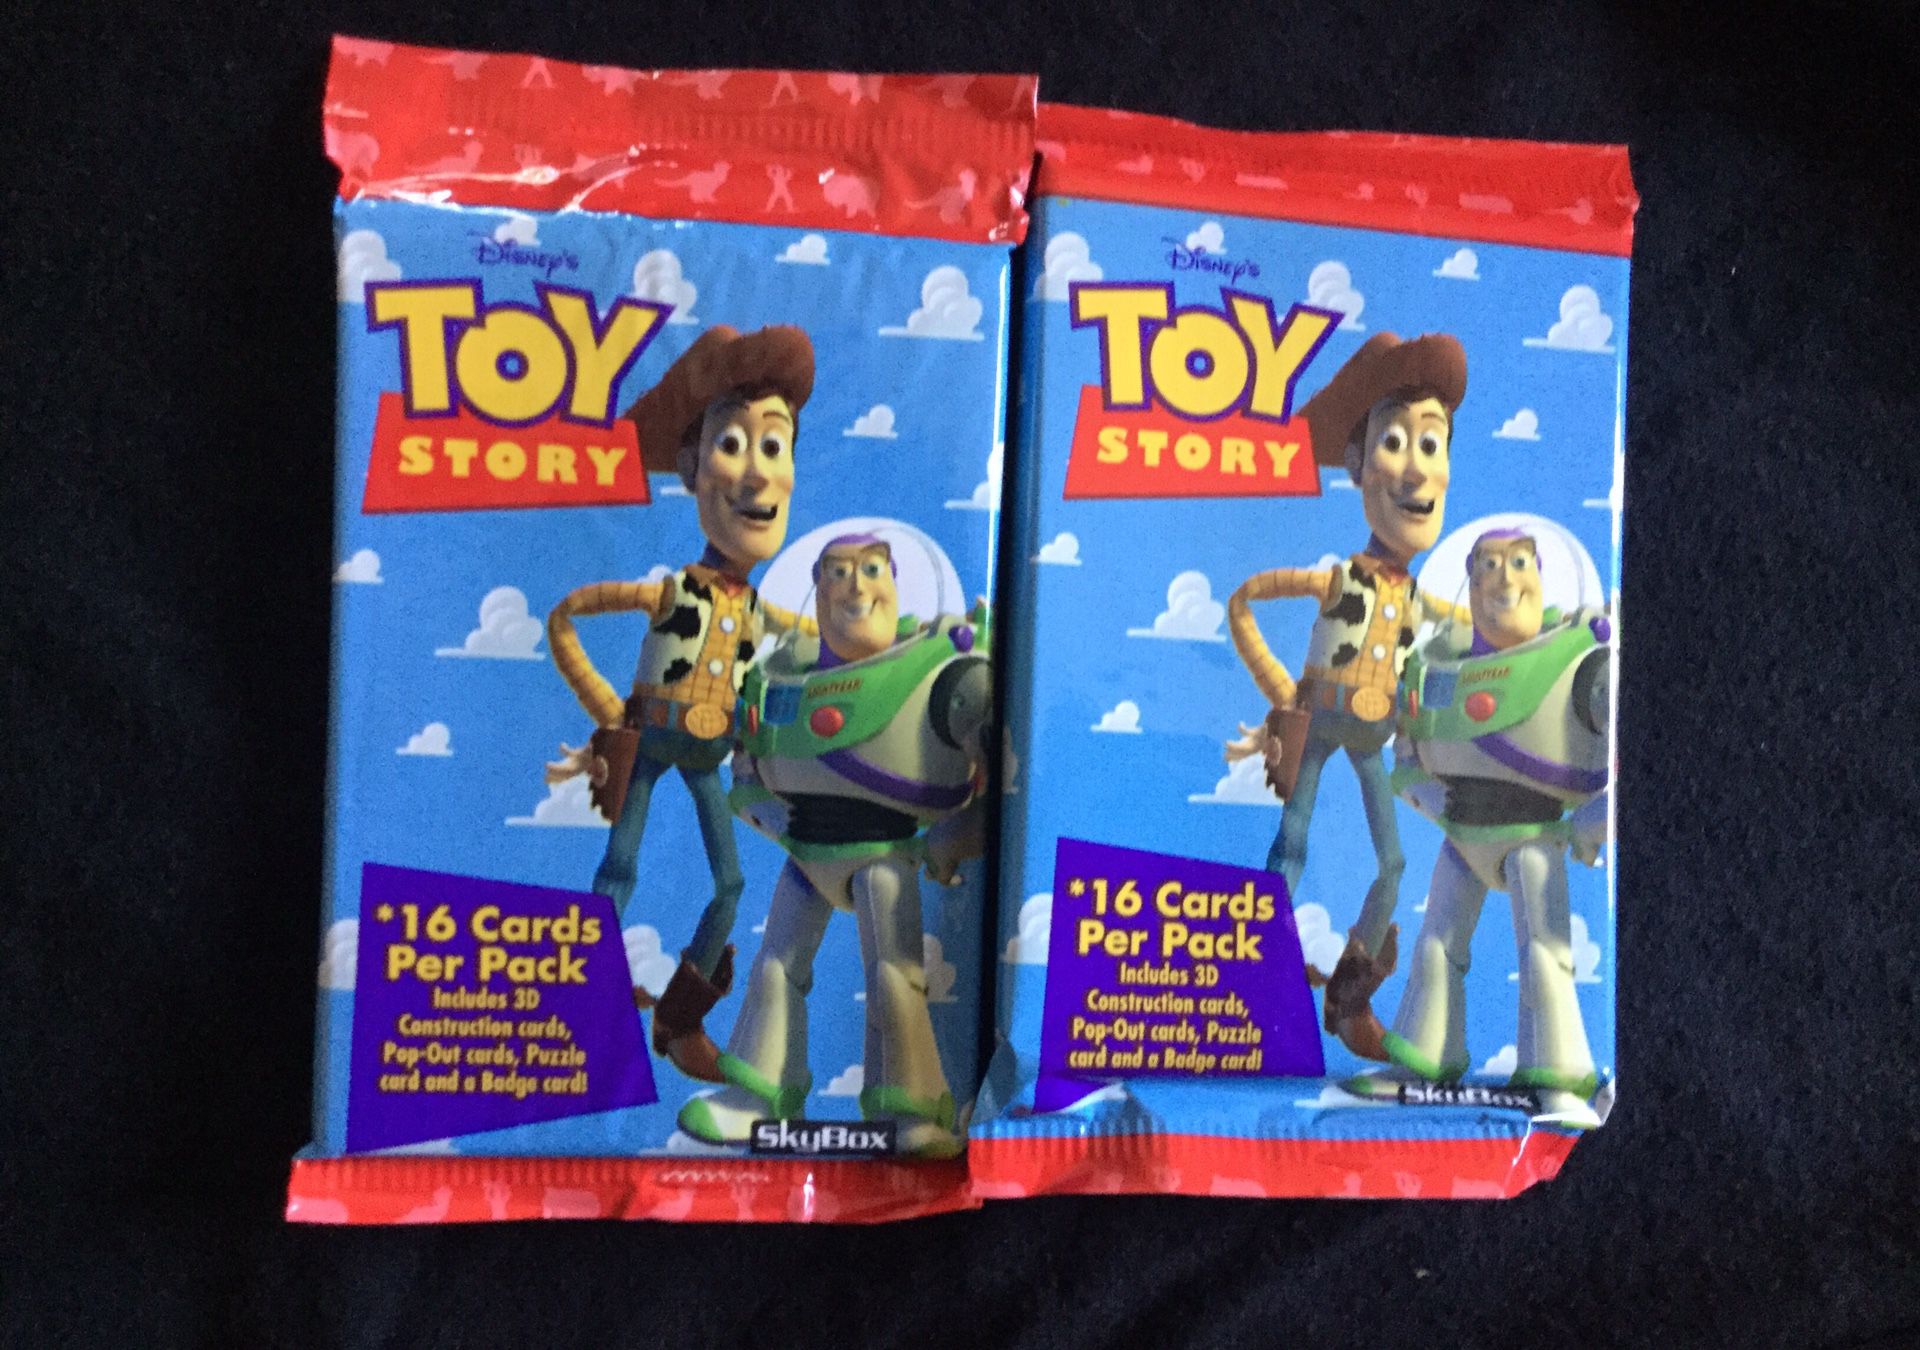 Toy story vintage Collectable cards